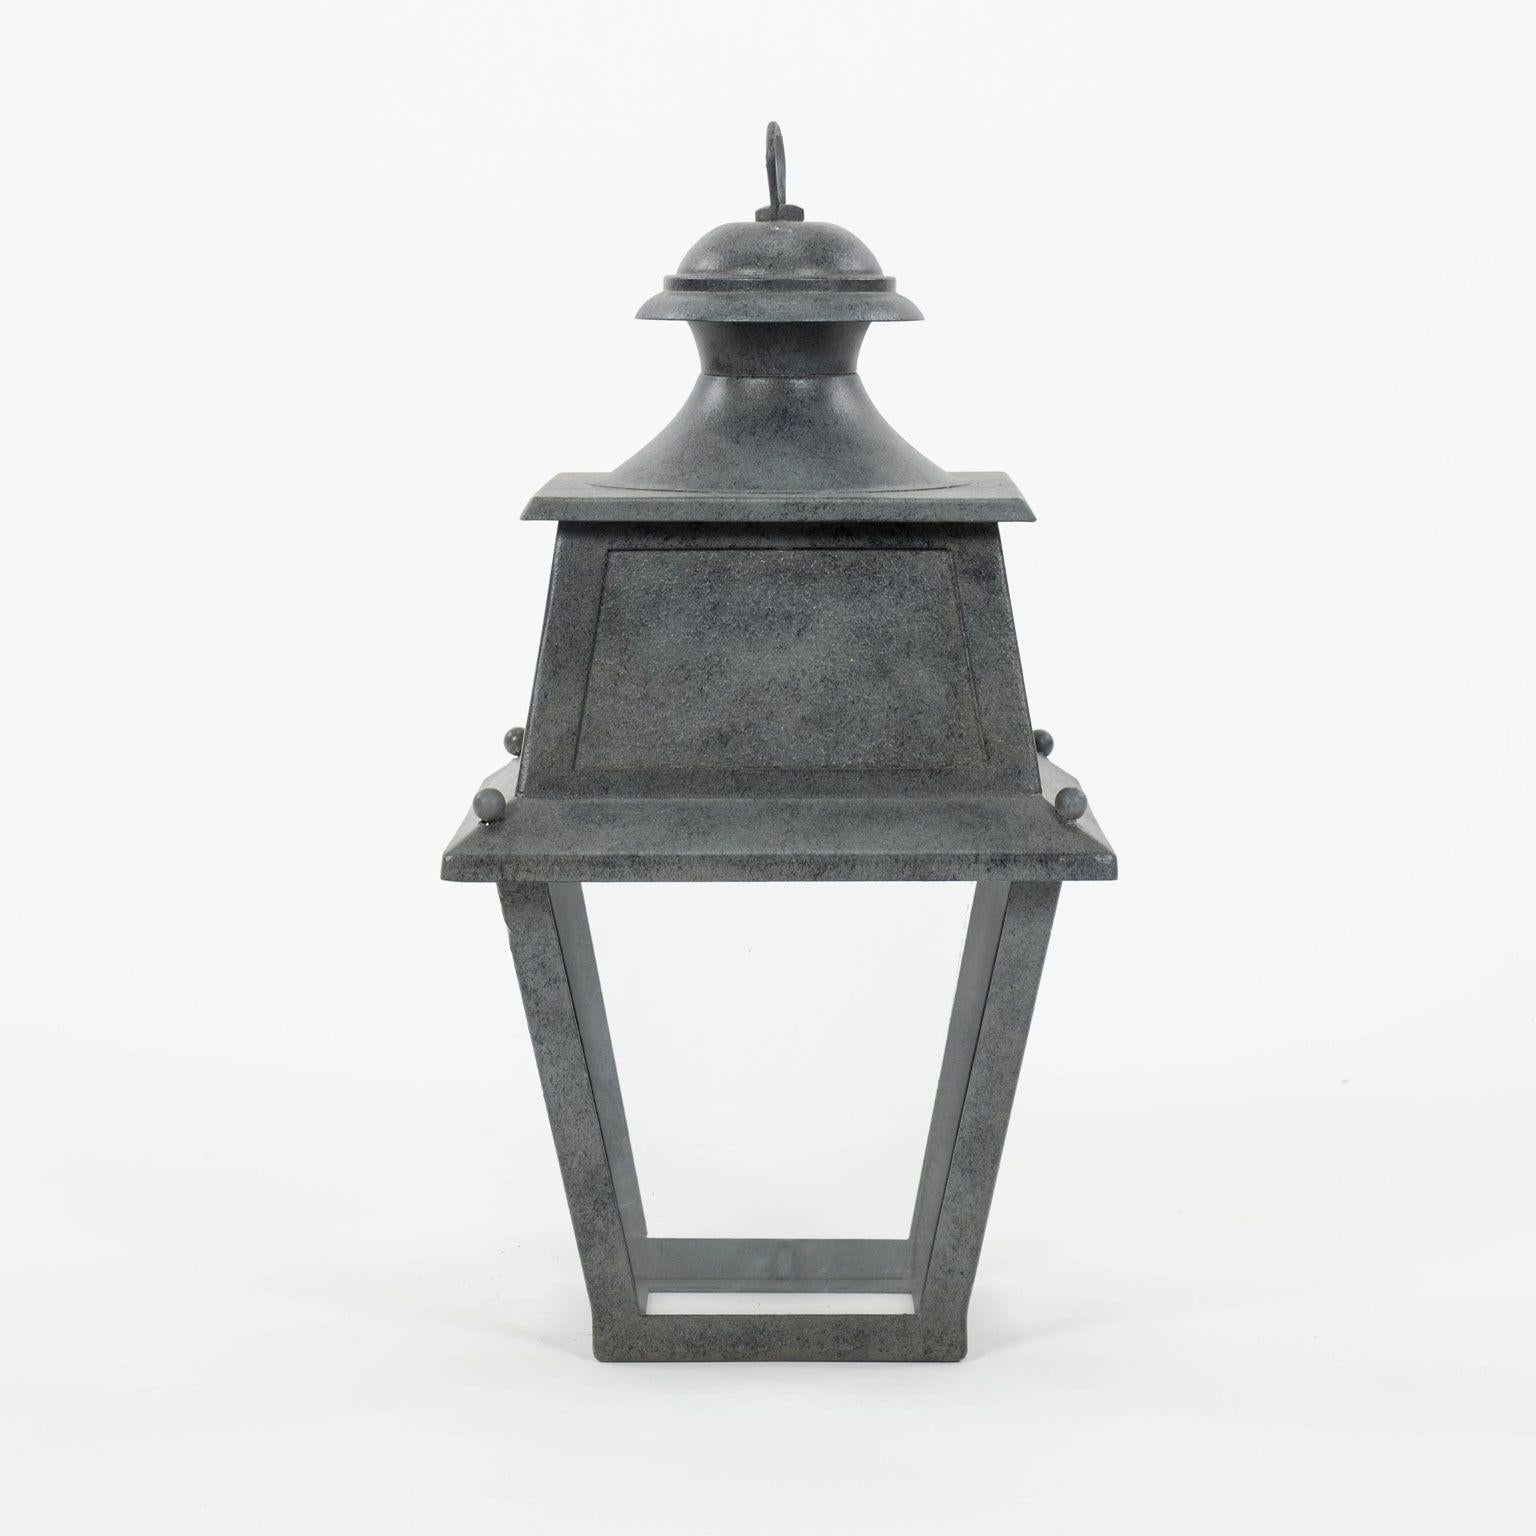 Tole, glass and iron lantern dating to early 20th century, France. Not wired for electricity, but can be wired, or fitted for usage with gas, for an additional cost. Includes chain and a canopy (listed height does not include chain). Restored finish